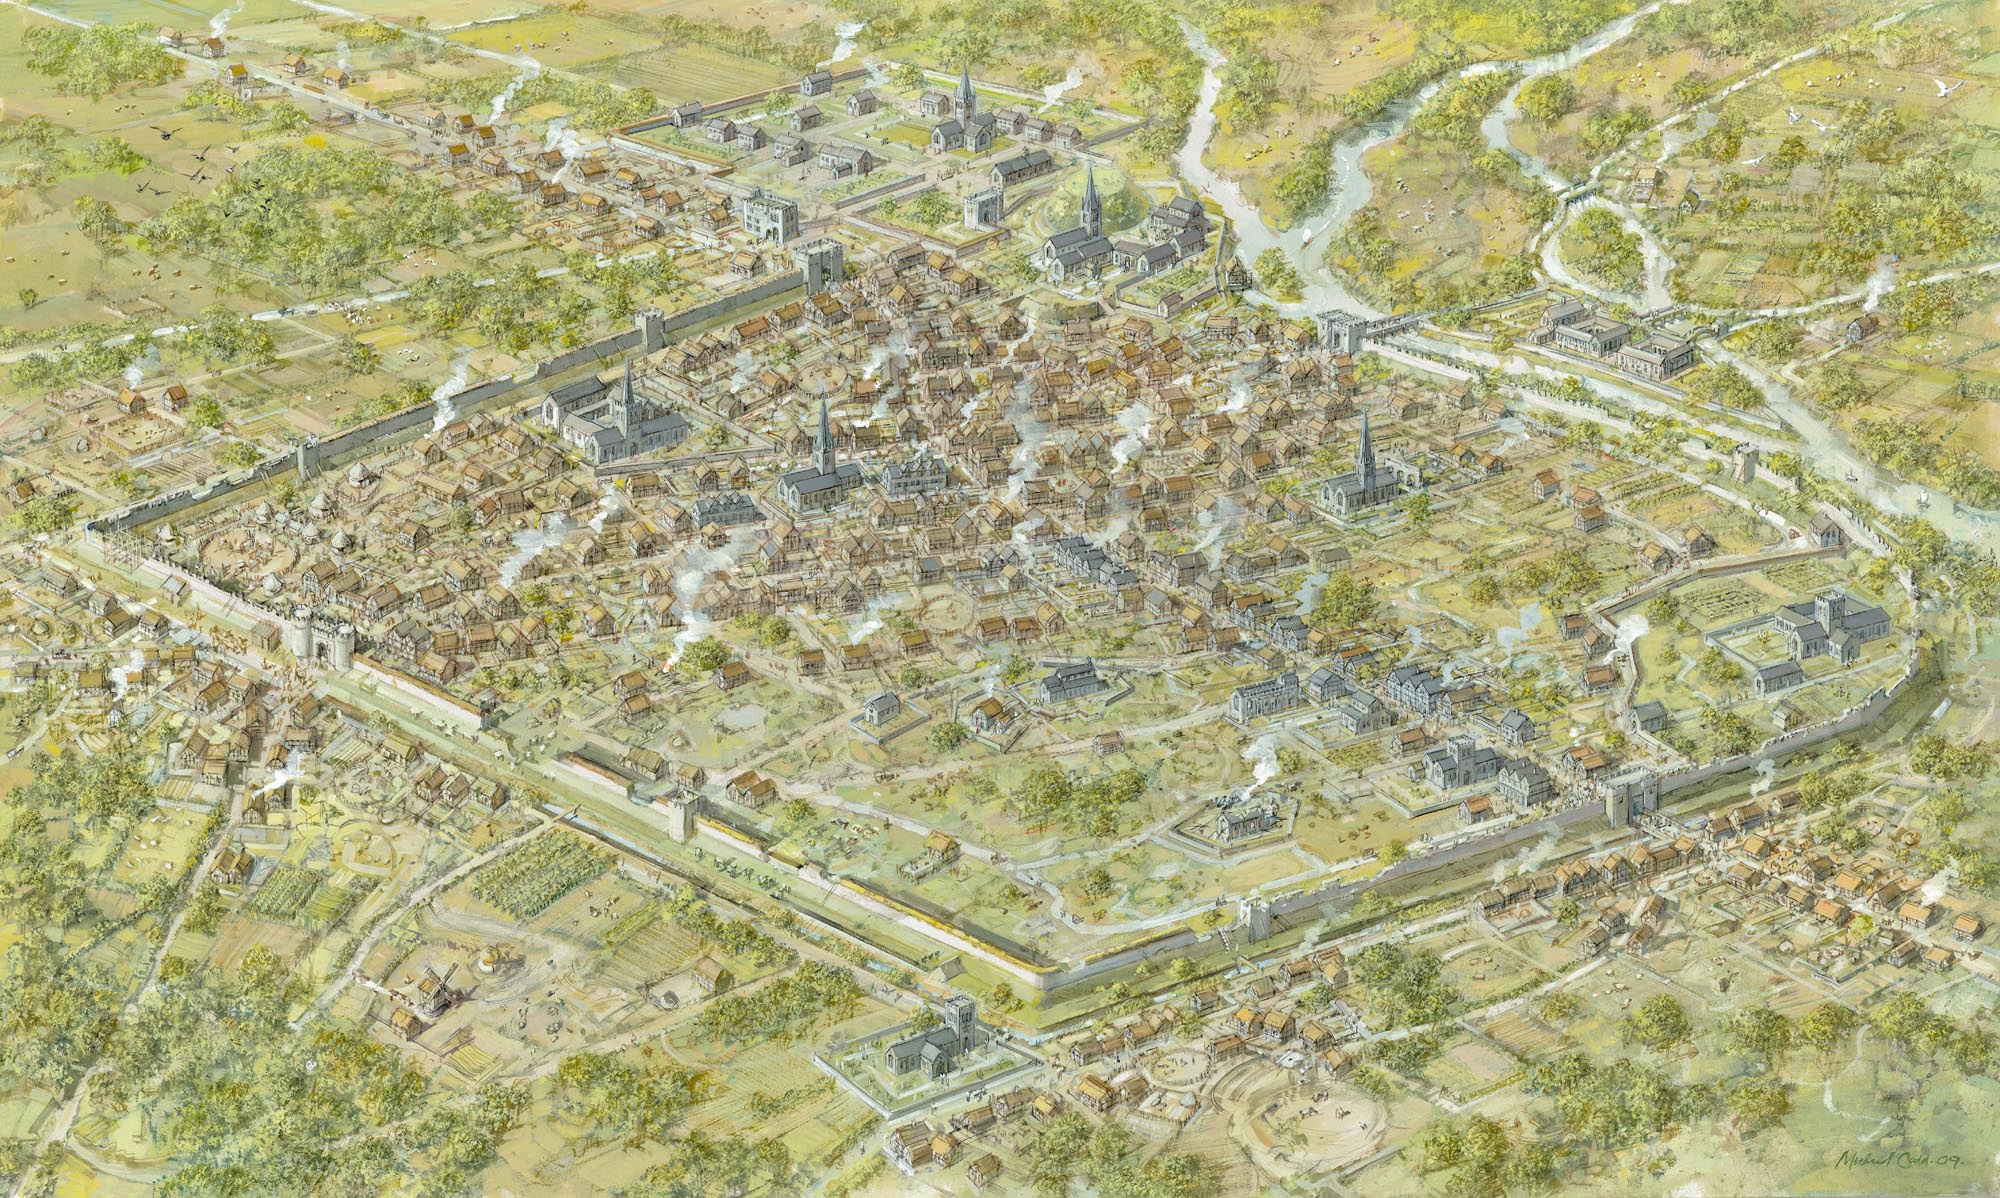 An artist impression of how Leicester looked around 1450 -